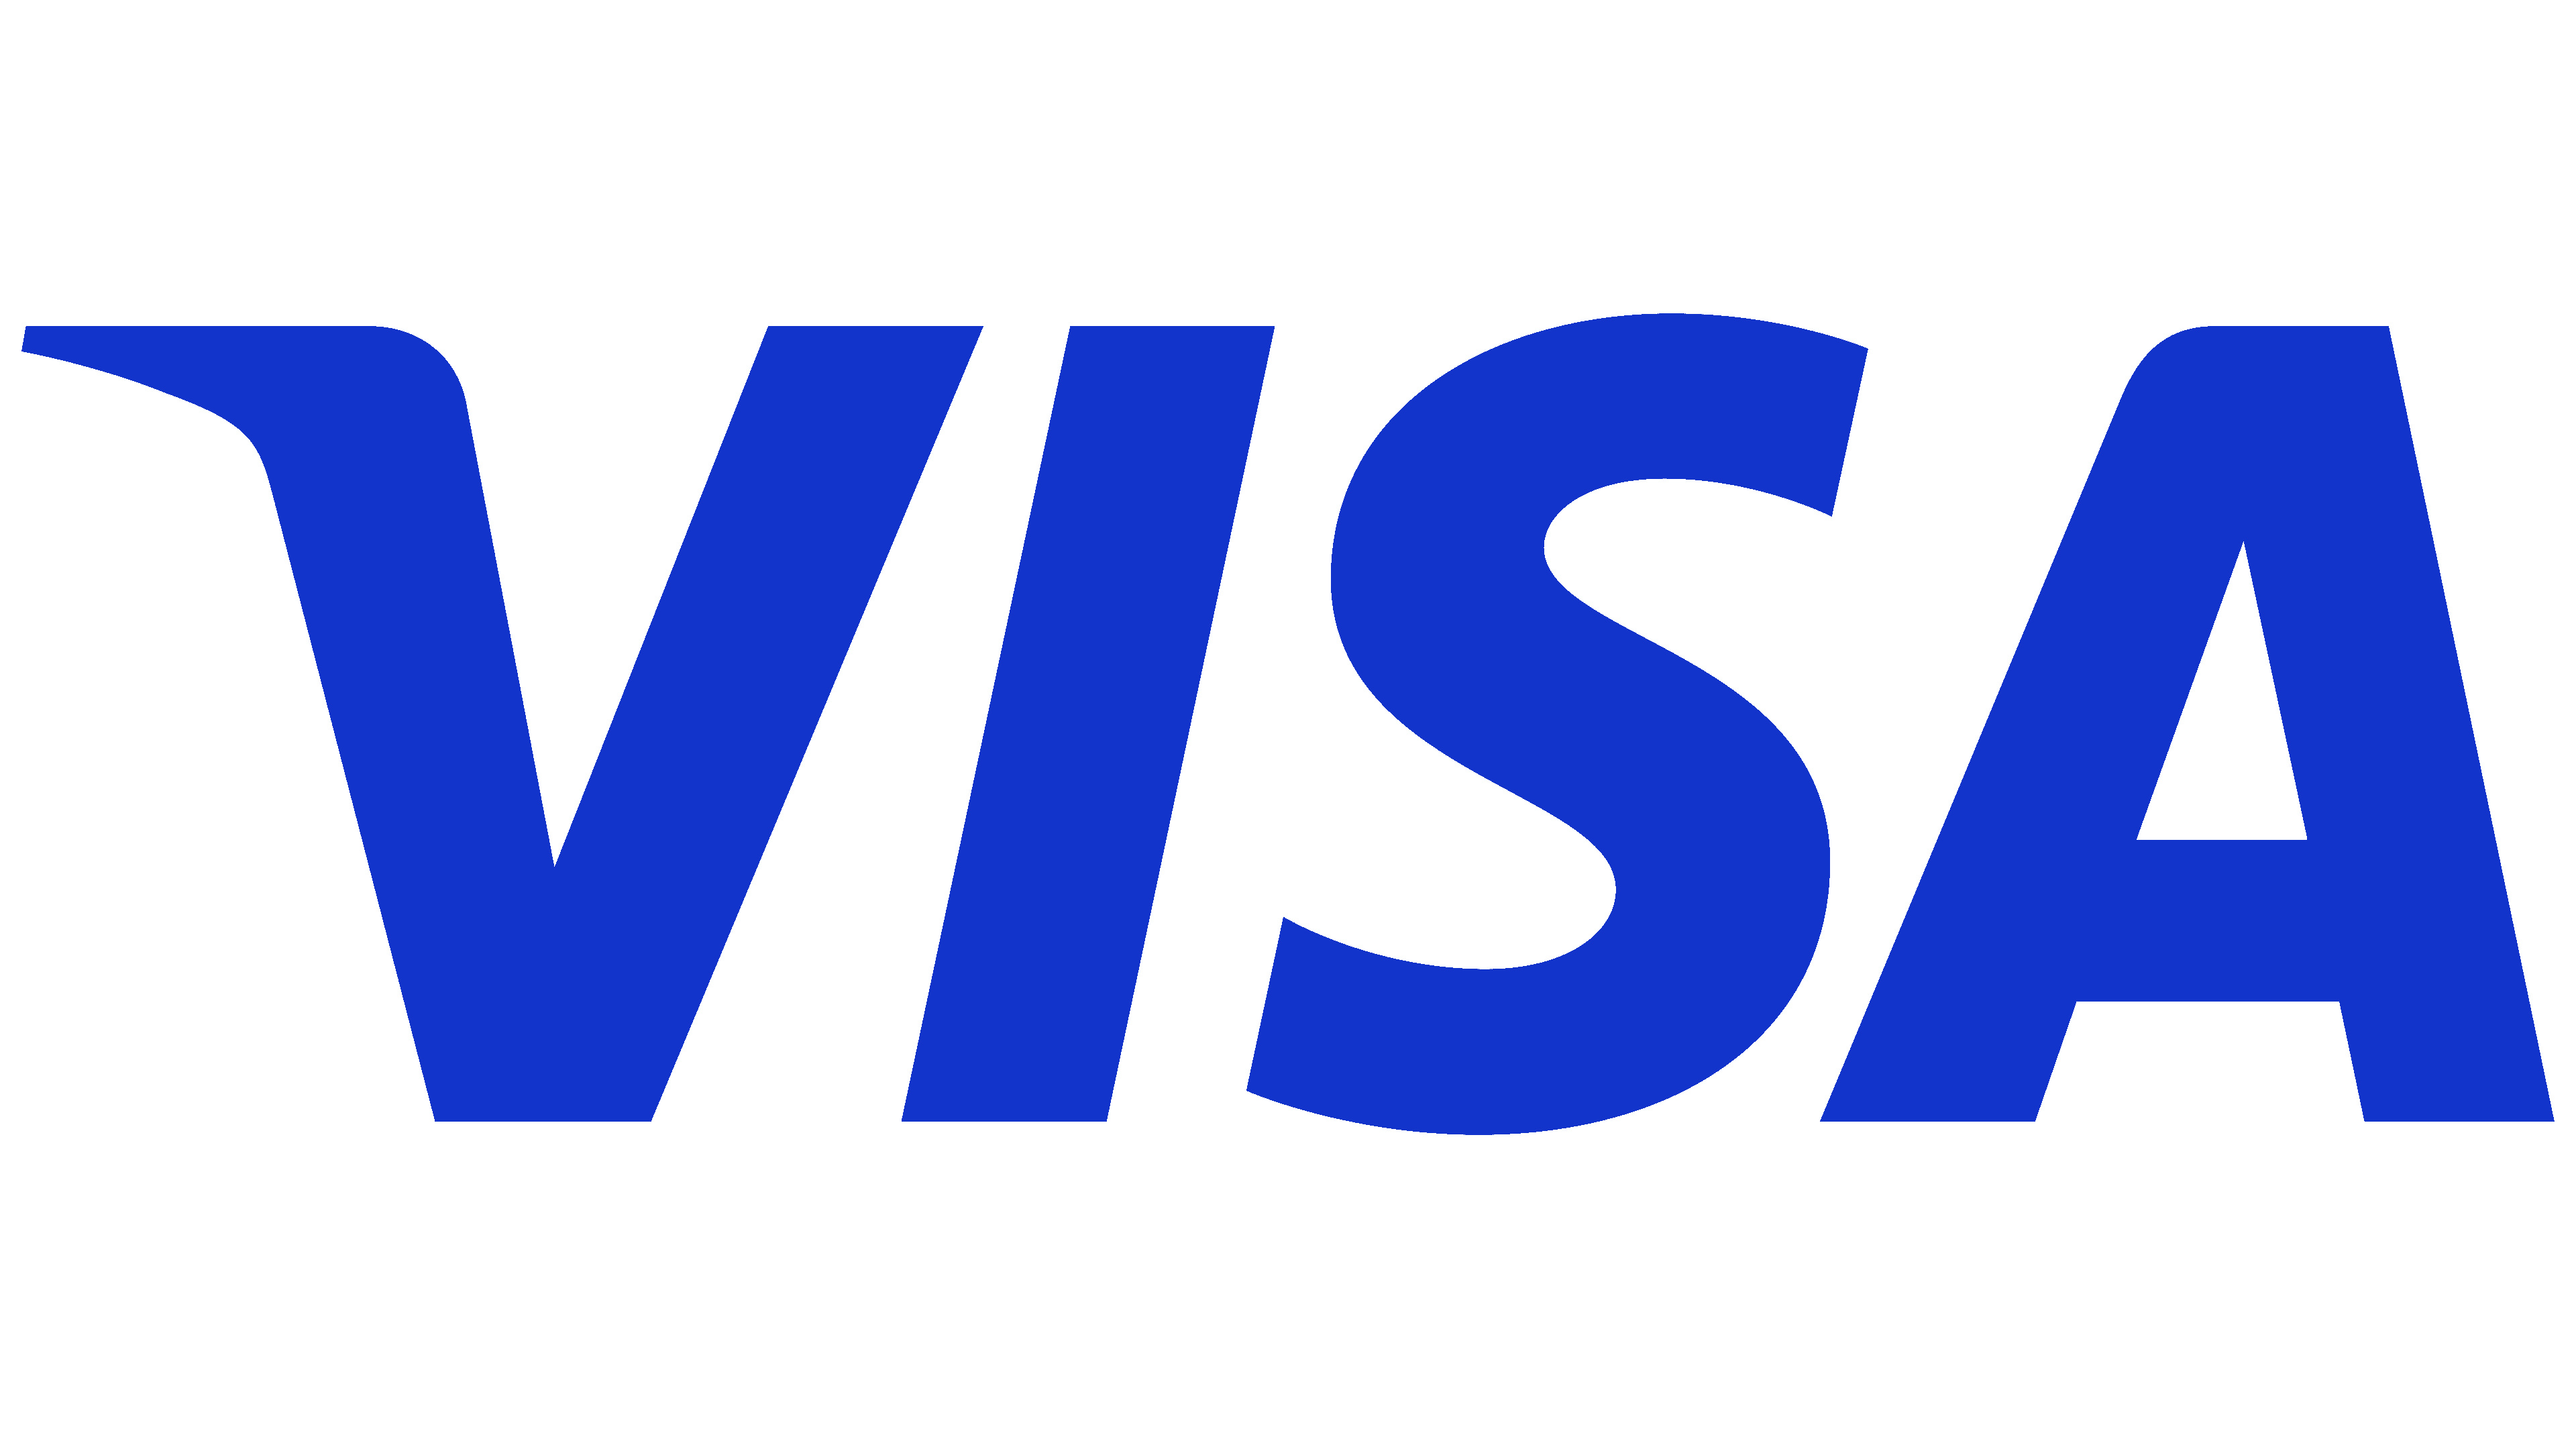 Visa (Card): An American multinational financial services corporation headquartered in San Francisco, California. 3840x2160 4K Background.